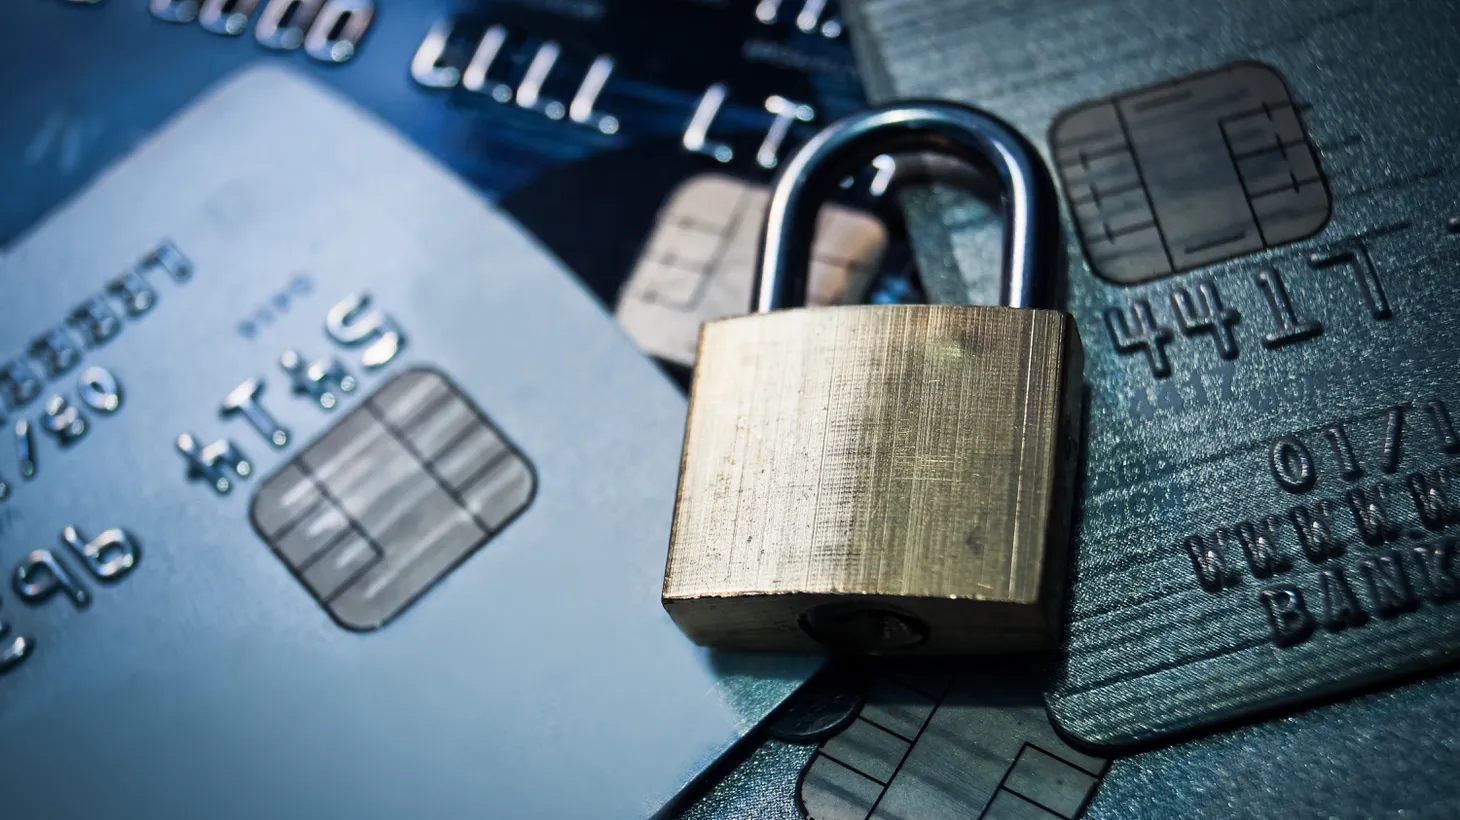 “The reason you have to keep your identity so secure is because the credit bureaus are tracking your every financial move, and they're not even keeping your data secure,” says Jessica Roy.